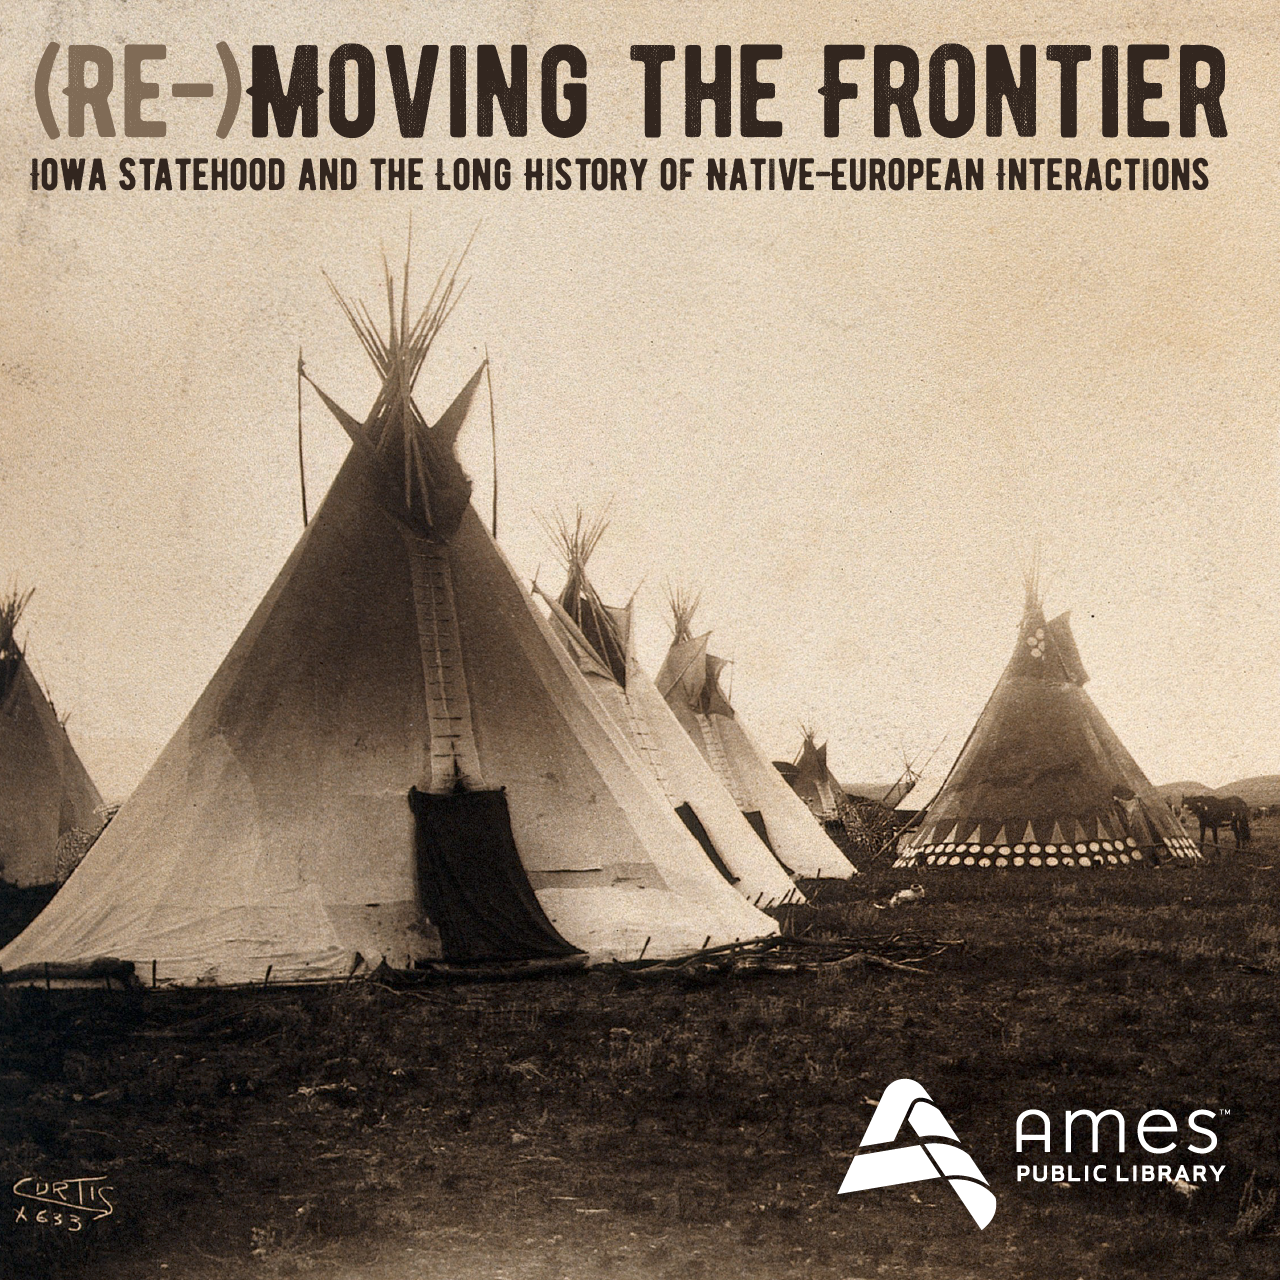 (Re-)Moving the Frontier: Iowa Statehood and the Long History of Native-European Interactions